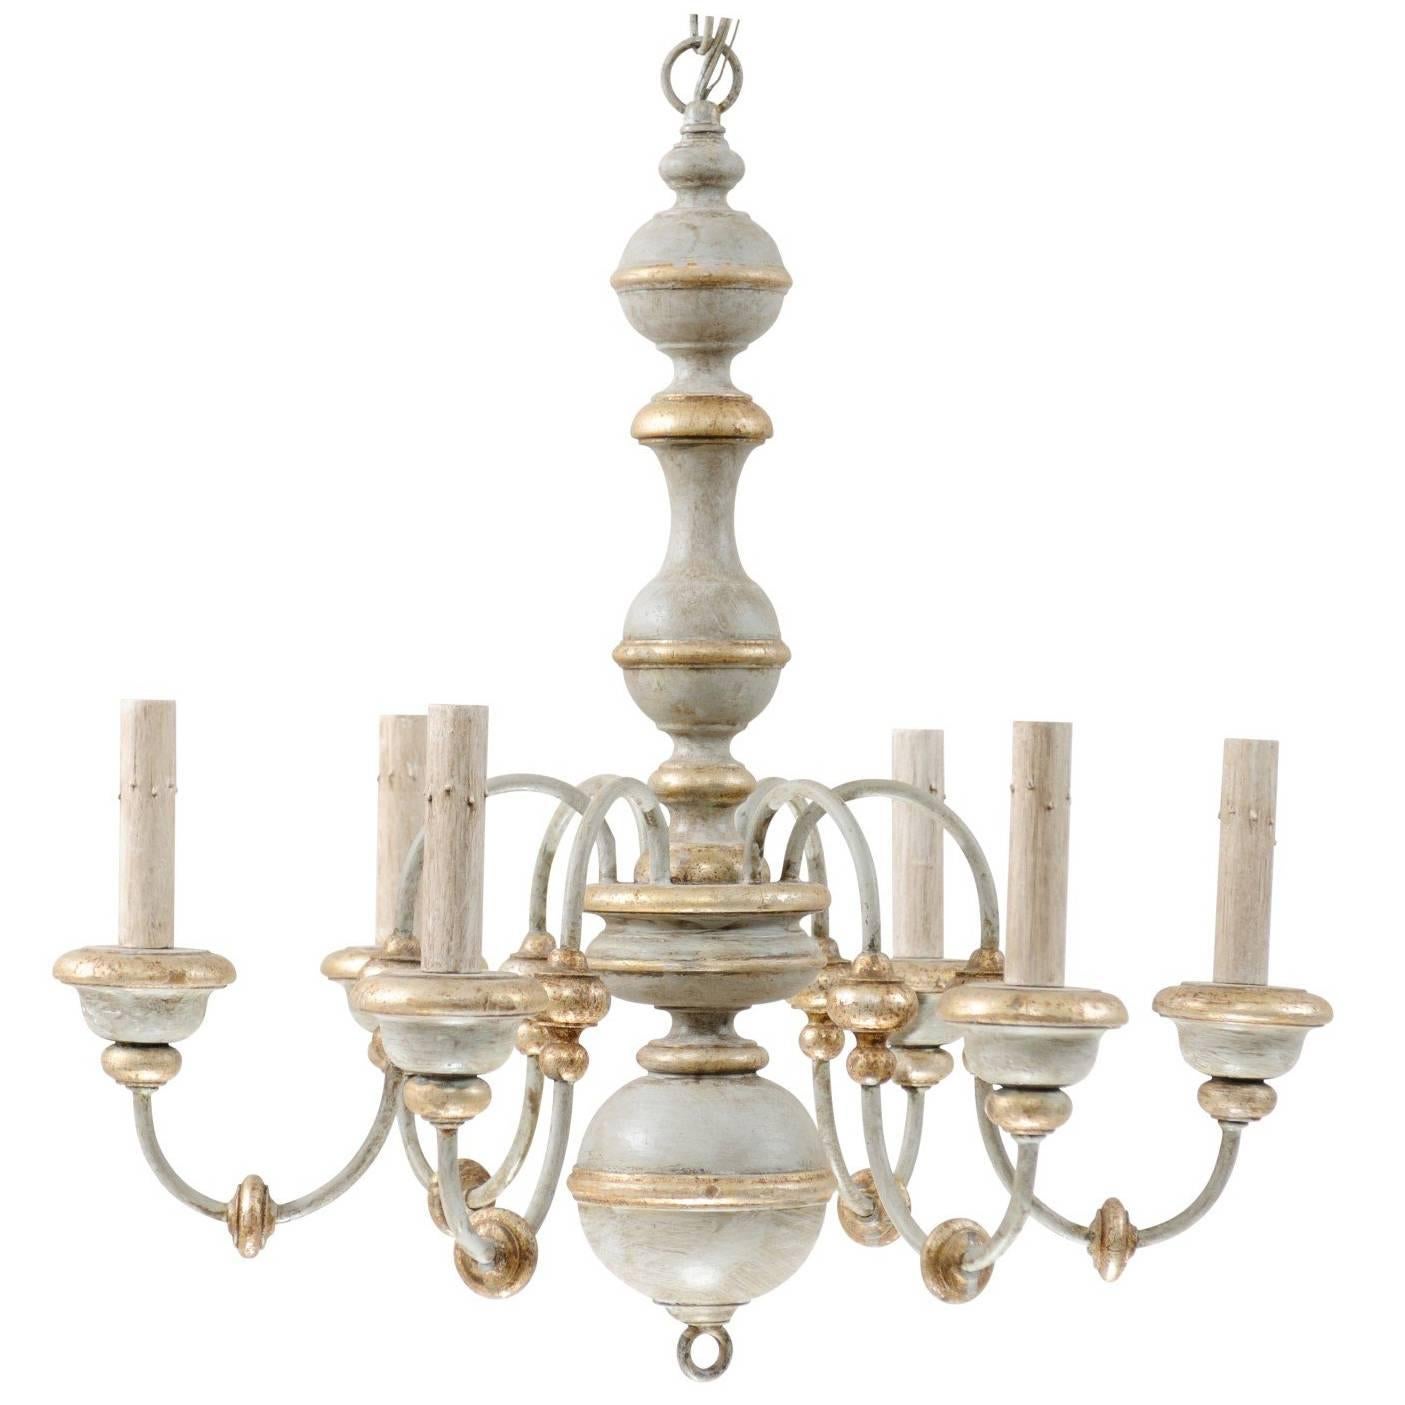 Italian Painted Wood Chandelier with Pretty Light Blue/Grey Gold and Silver Hues